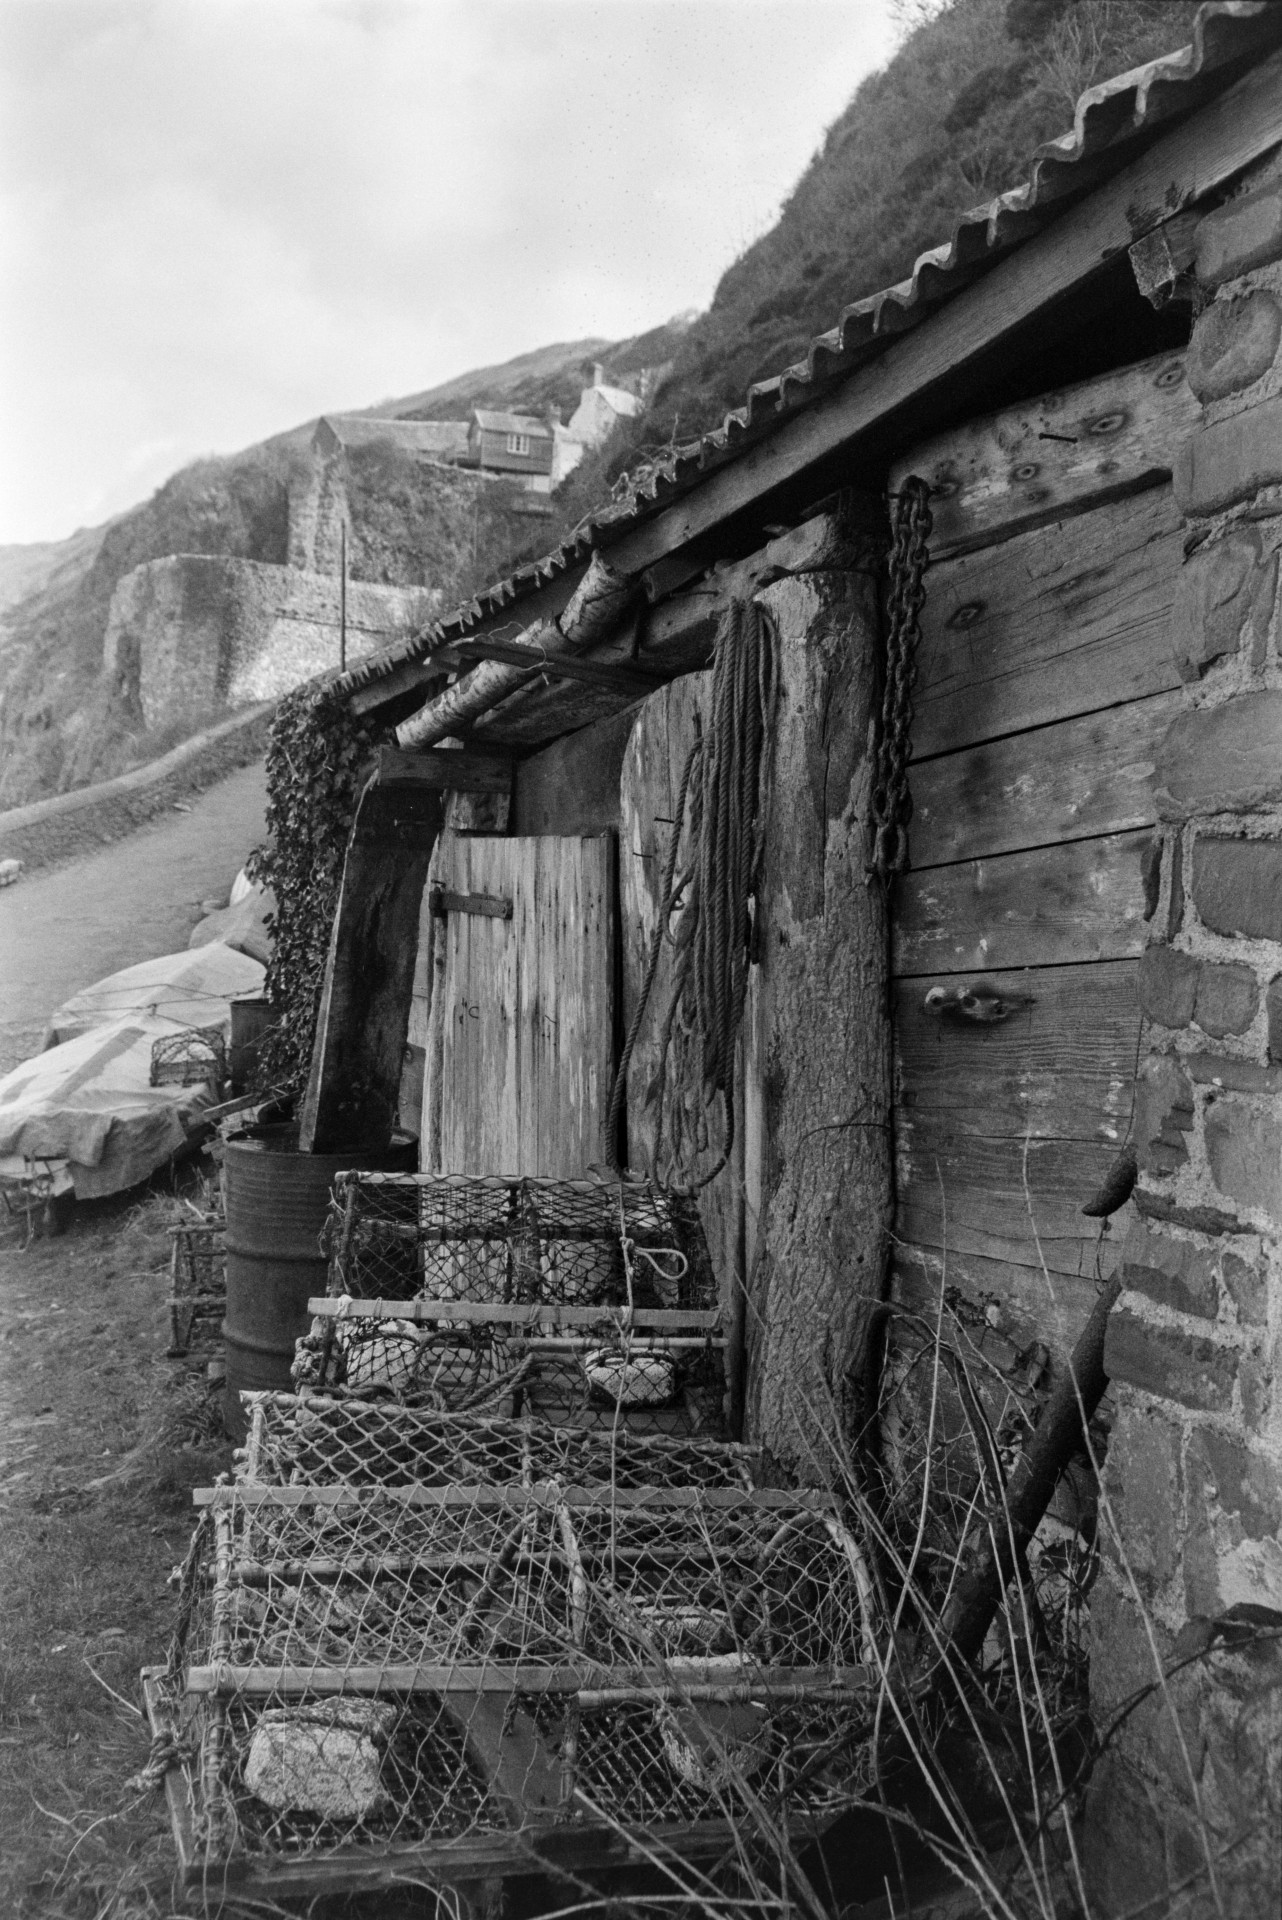 Lobster pots stacked in front of a shed with a tiled roof at Bucks Mills. Boats are hauled up next to a road by the shed.